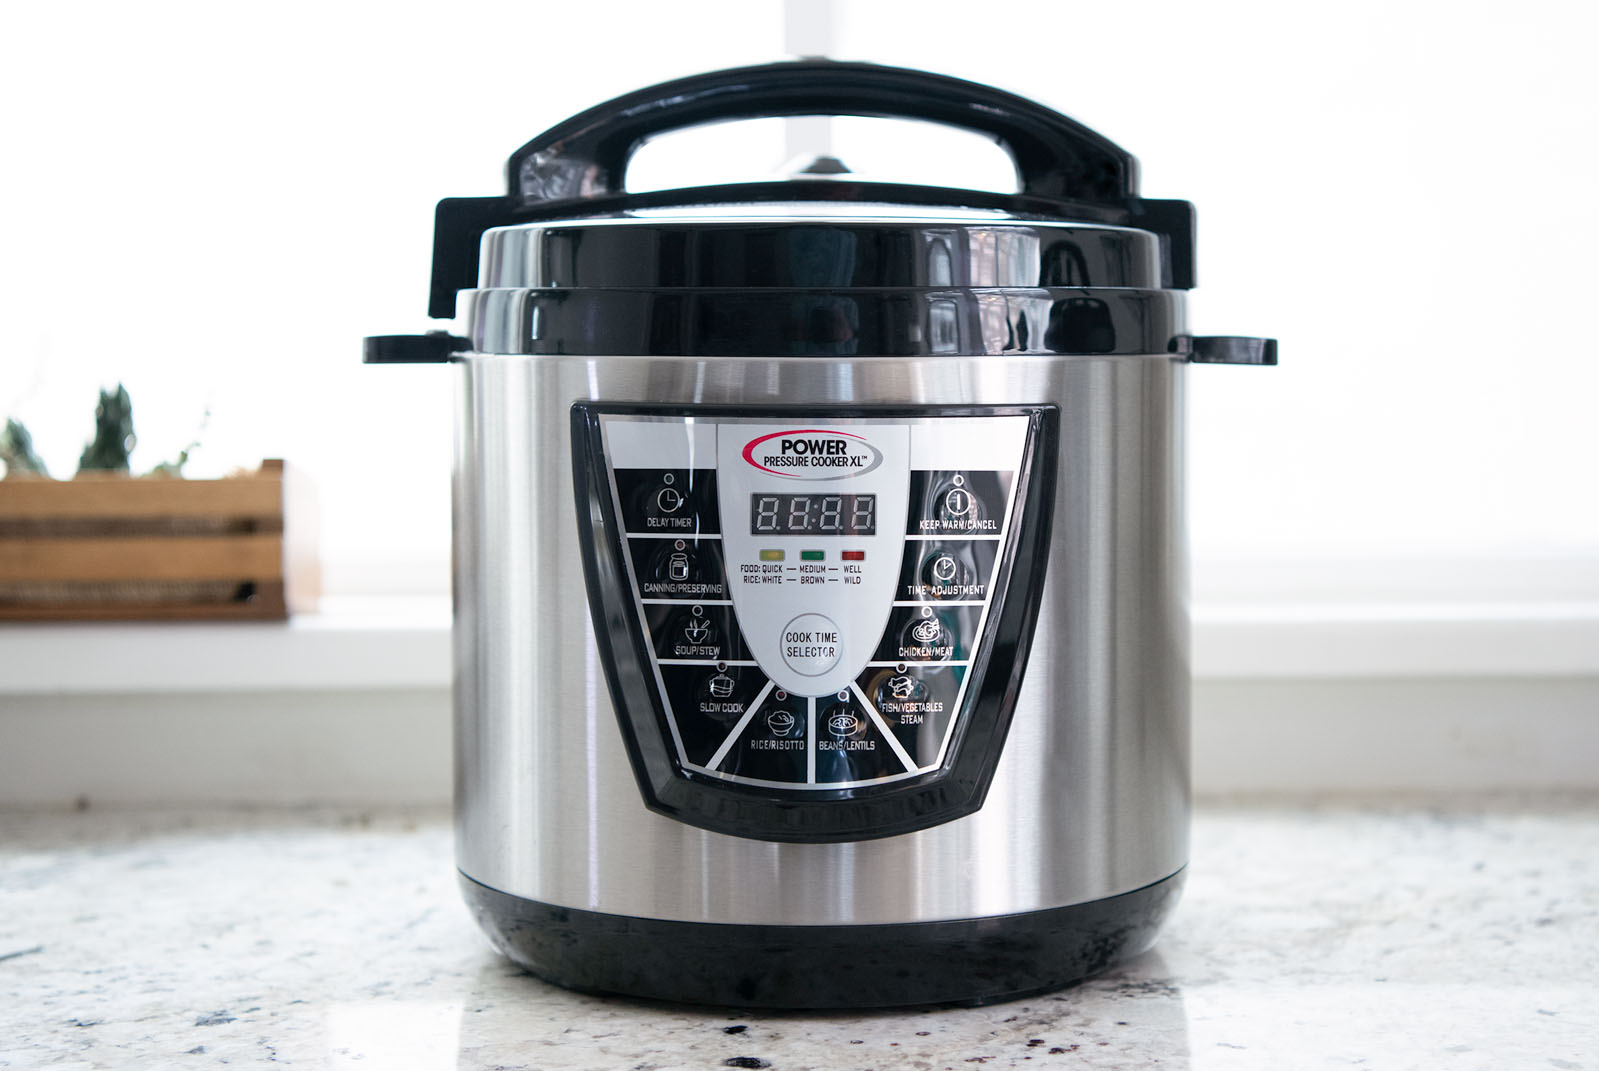 Eyeing That Instant Pot Why Stainless Steel Isn T As Safe As You Think And What To Use Instead Freedom Coffee,Beef Stir Fry Ideas